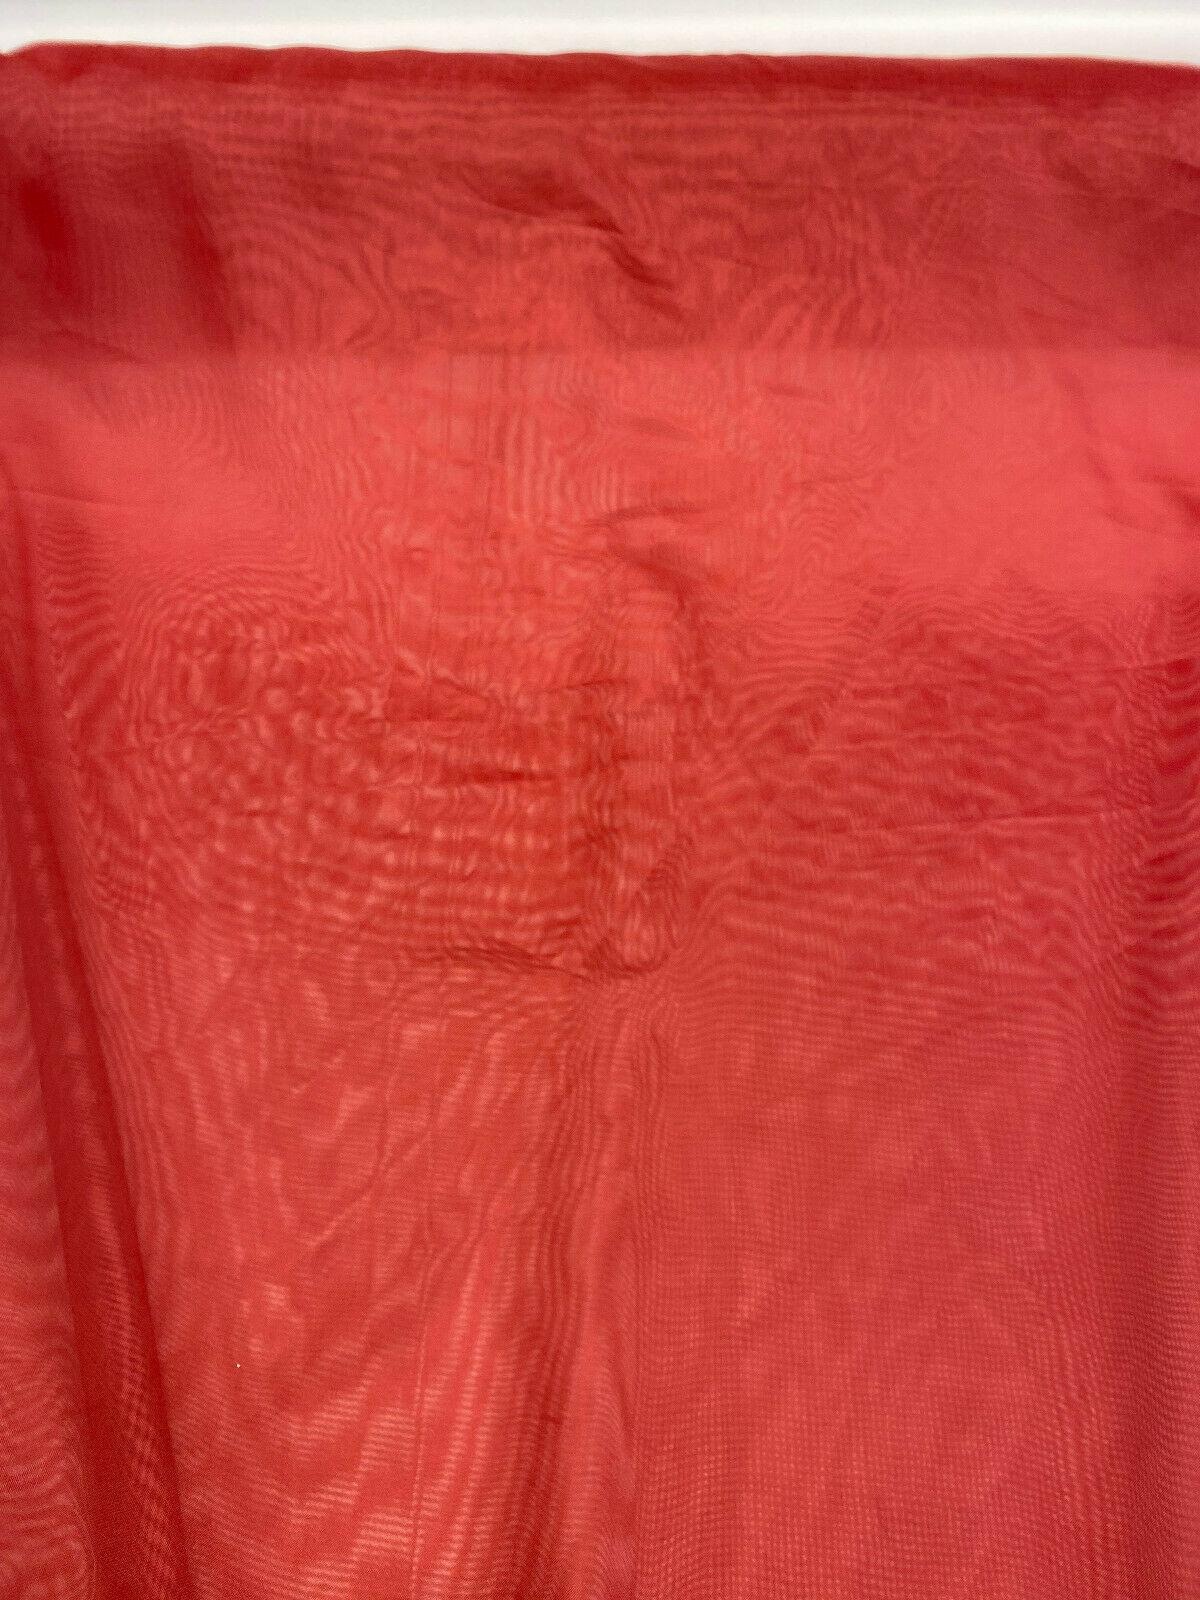 118 Drapery Sheer Voile Red Fabric